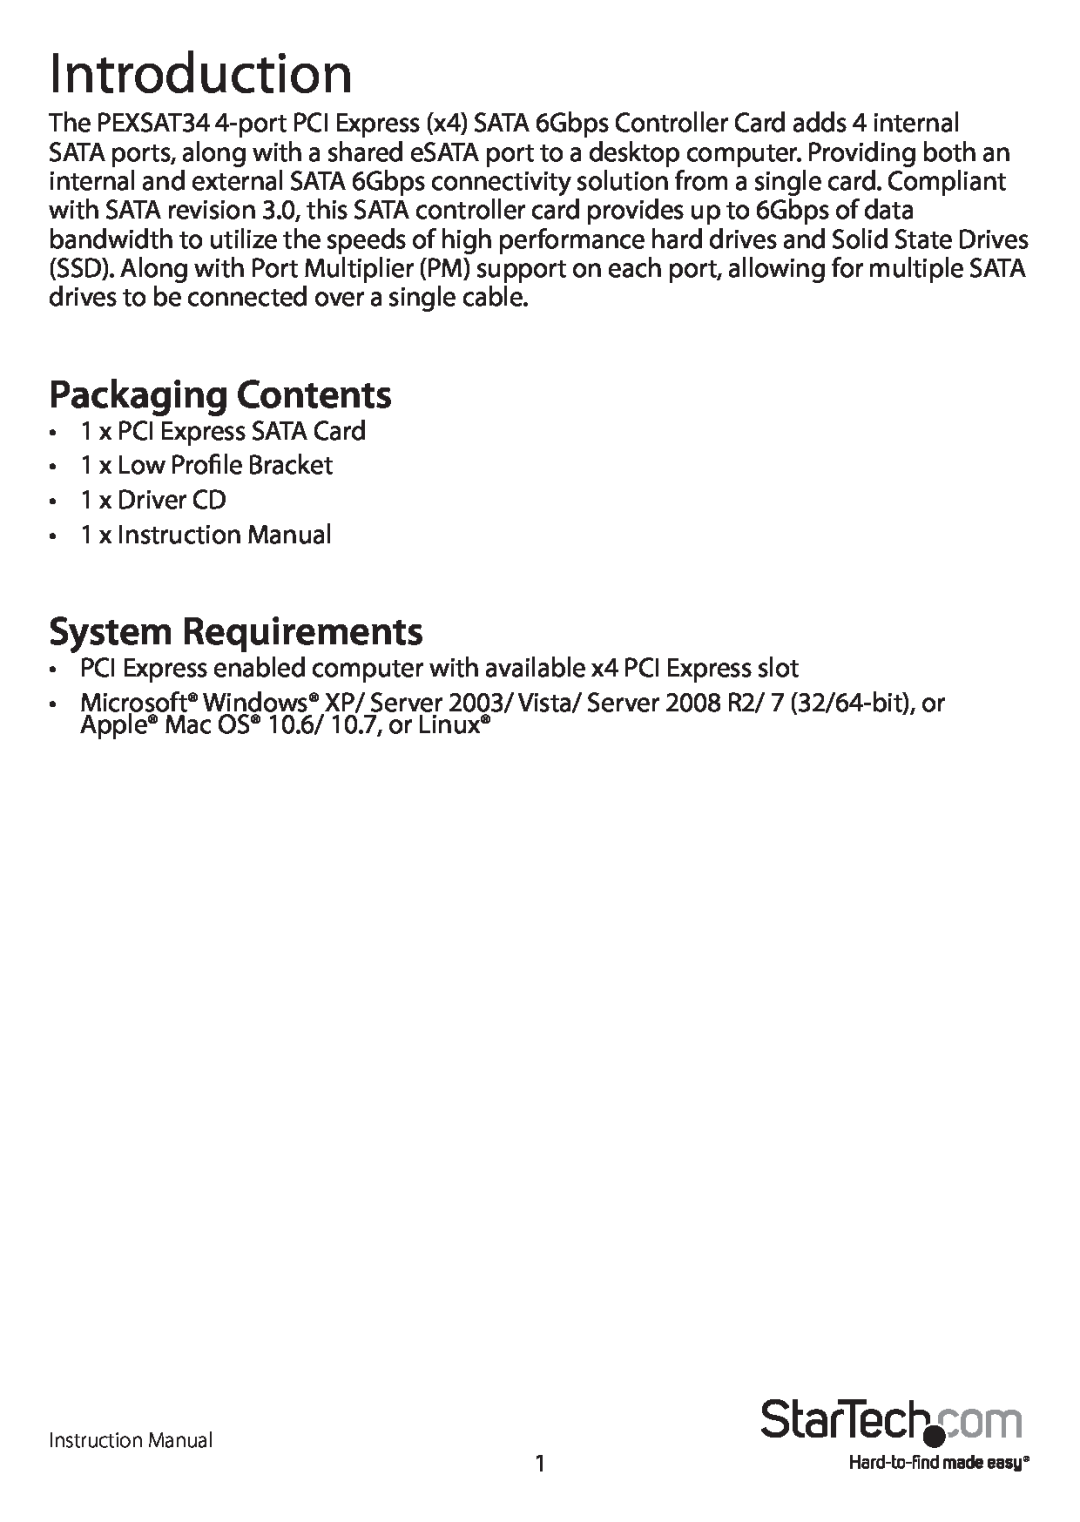 StarTech.com PEXSAT34 manual Introduction, Packaging Contents, System Requirements 